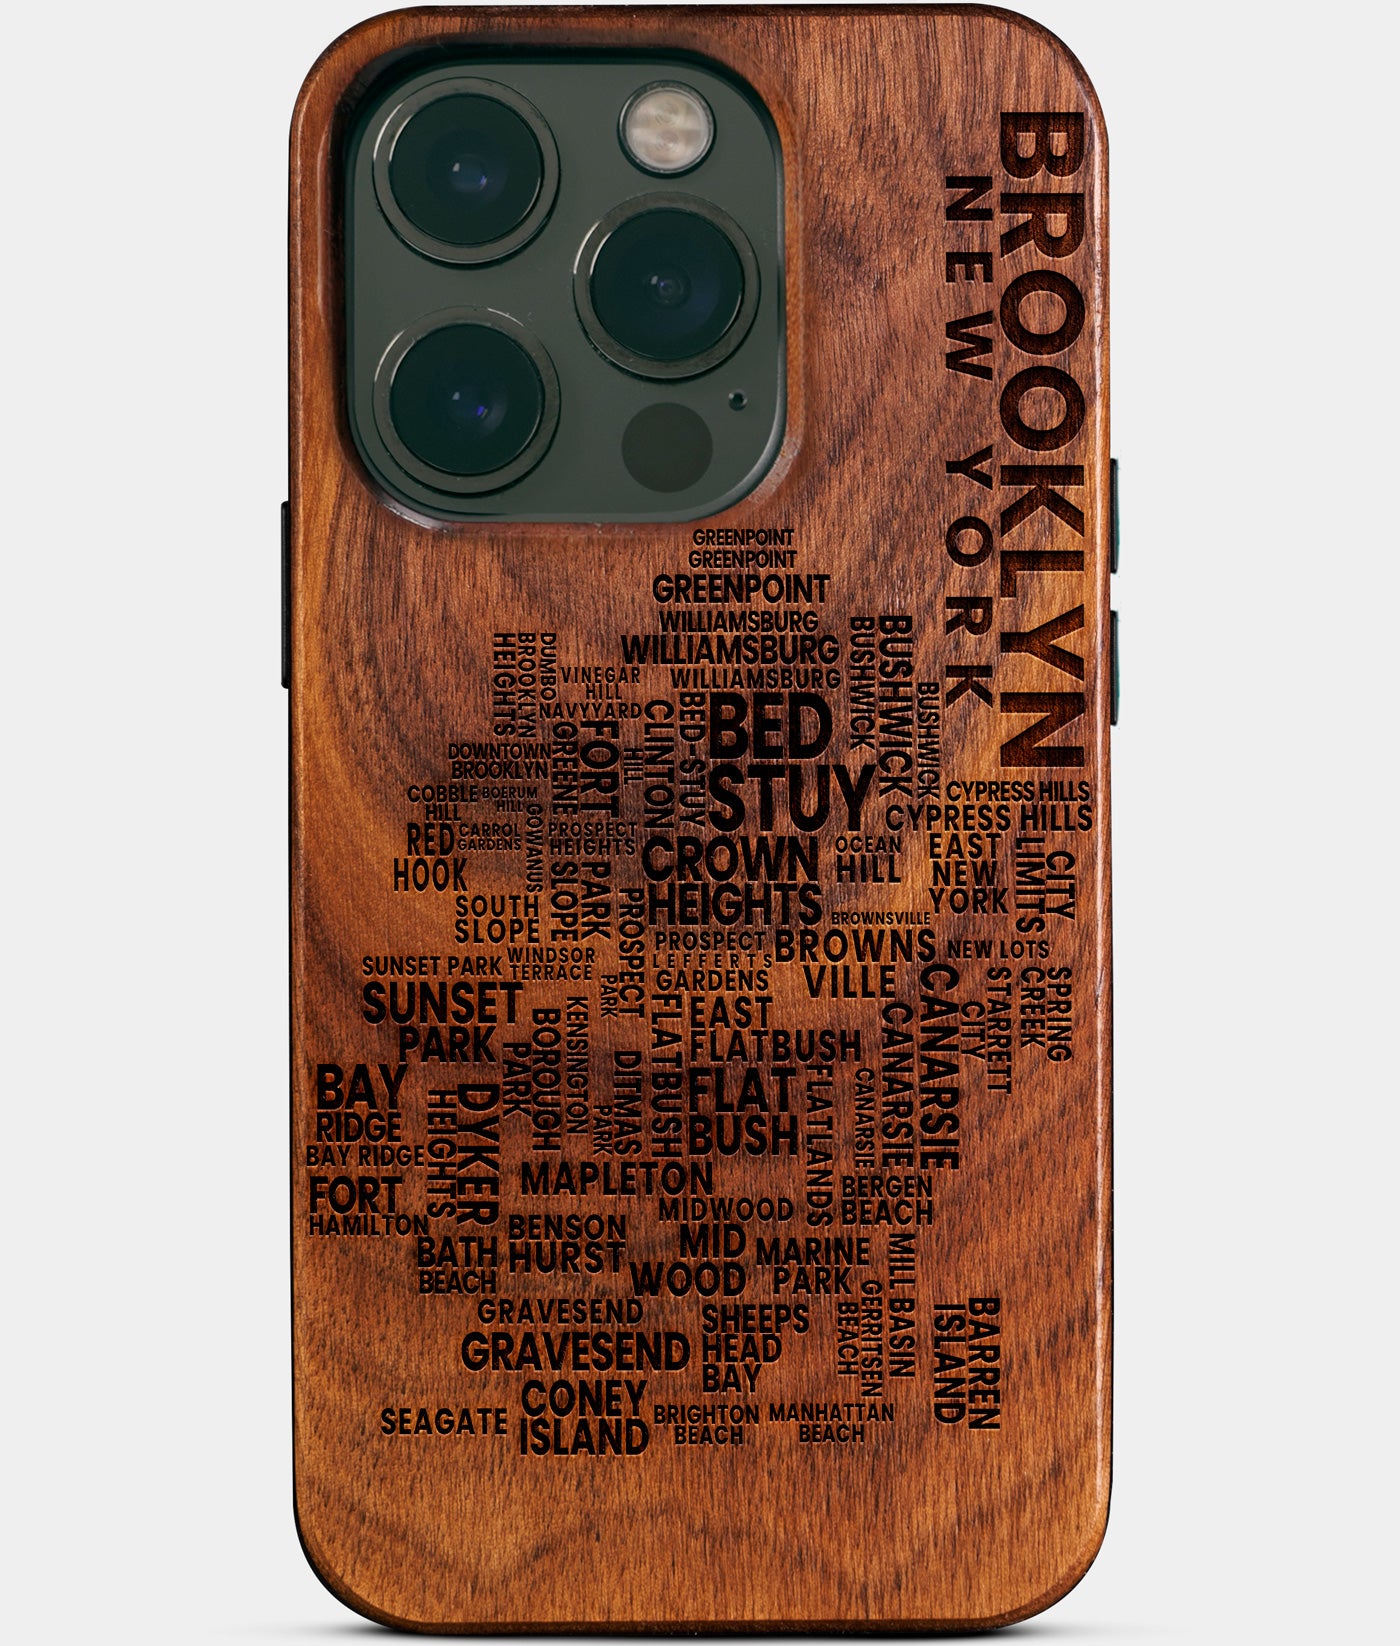 Custom New York iPhone Cases, Brooklyn College Merch, Brooklyn Tourist Gift Travel Souvenir, Best Brooklyn Gifts for him, Brooklyn New York Gifts for men, Gift Ideas For Someone Moving To Brooklyn, Unique Brooklyn Themed Gift, Brooklyn Souvenir Shop, Brooklyn Gifts For Him, gifts for someone moving to New York